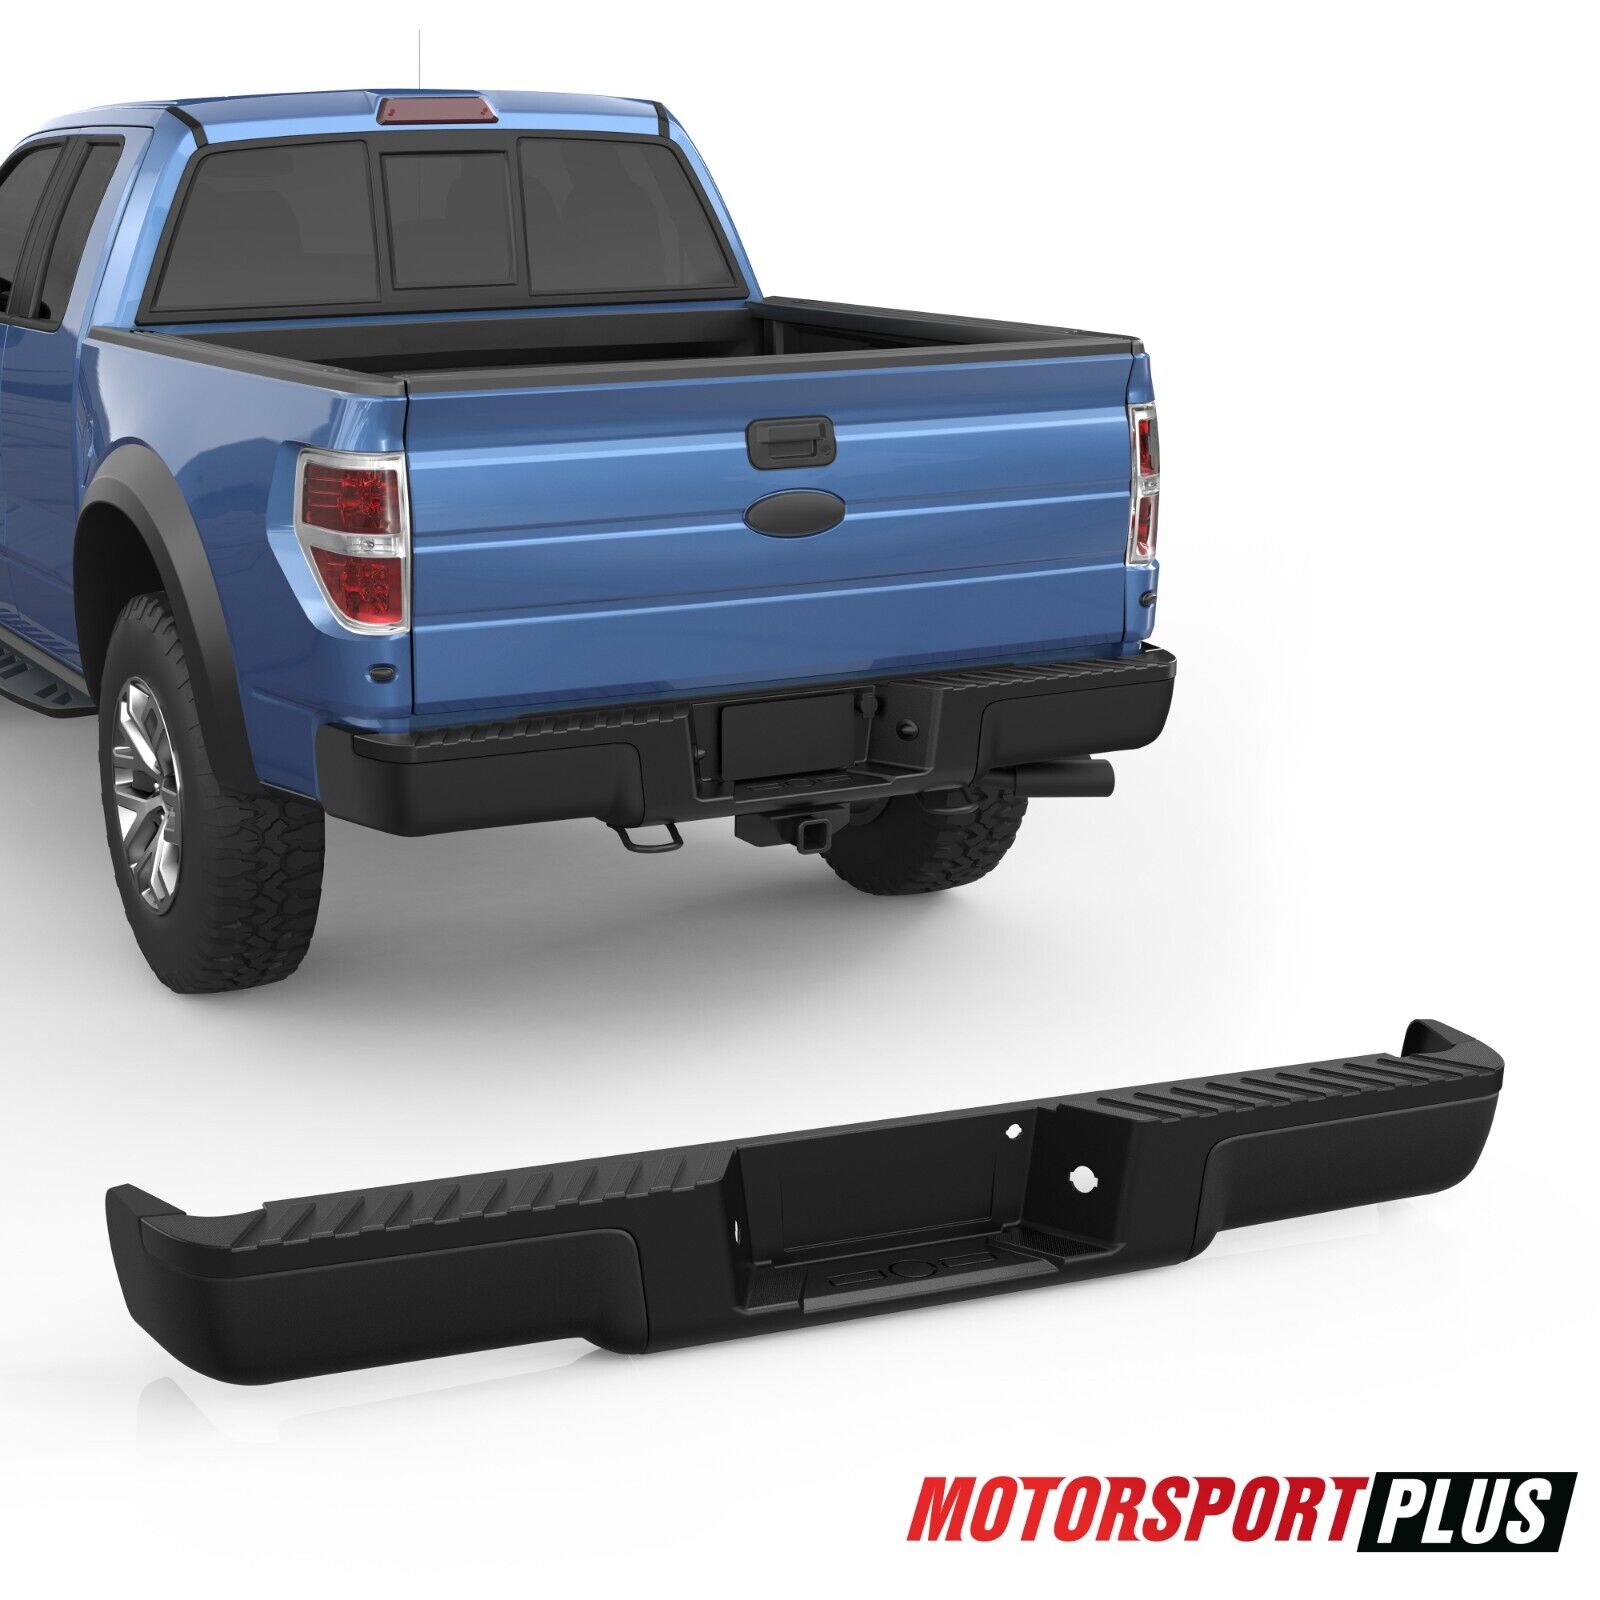 Black Rear Bumper For 2009-2014 Ford F-150 F150 Without Parking Sensor Holes